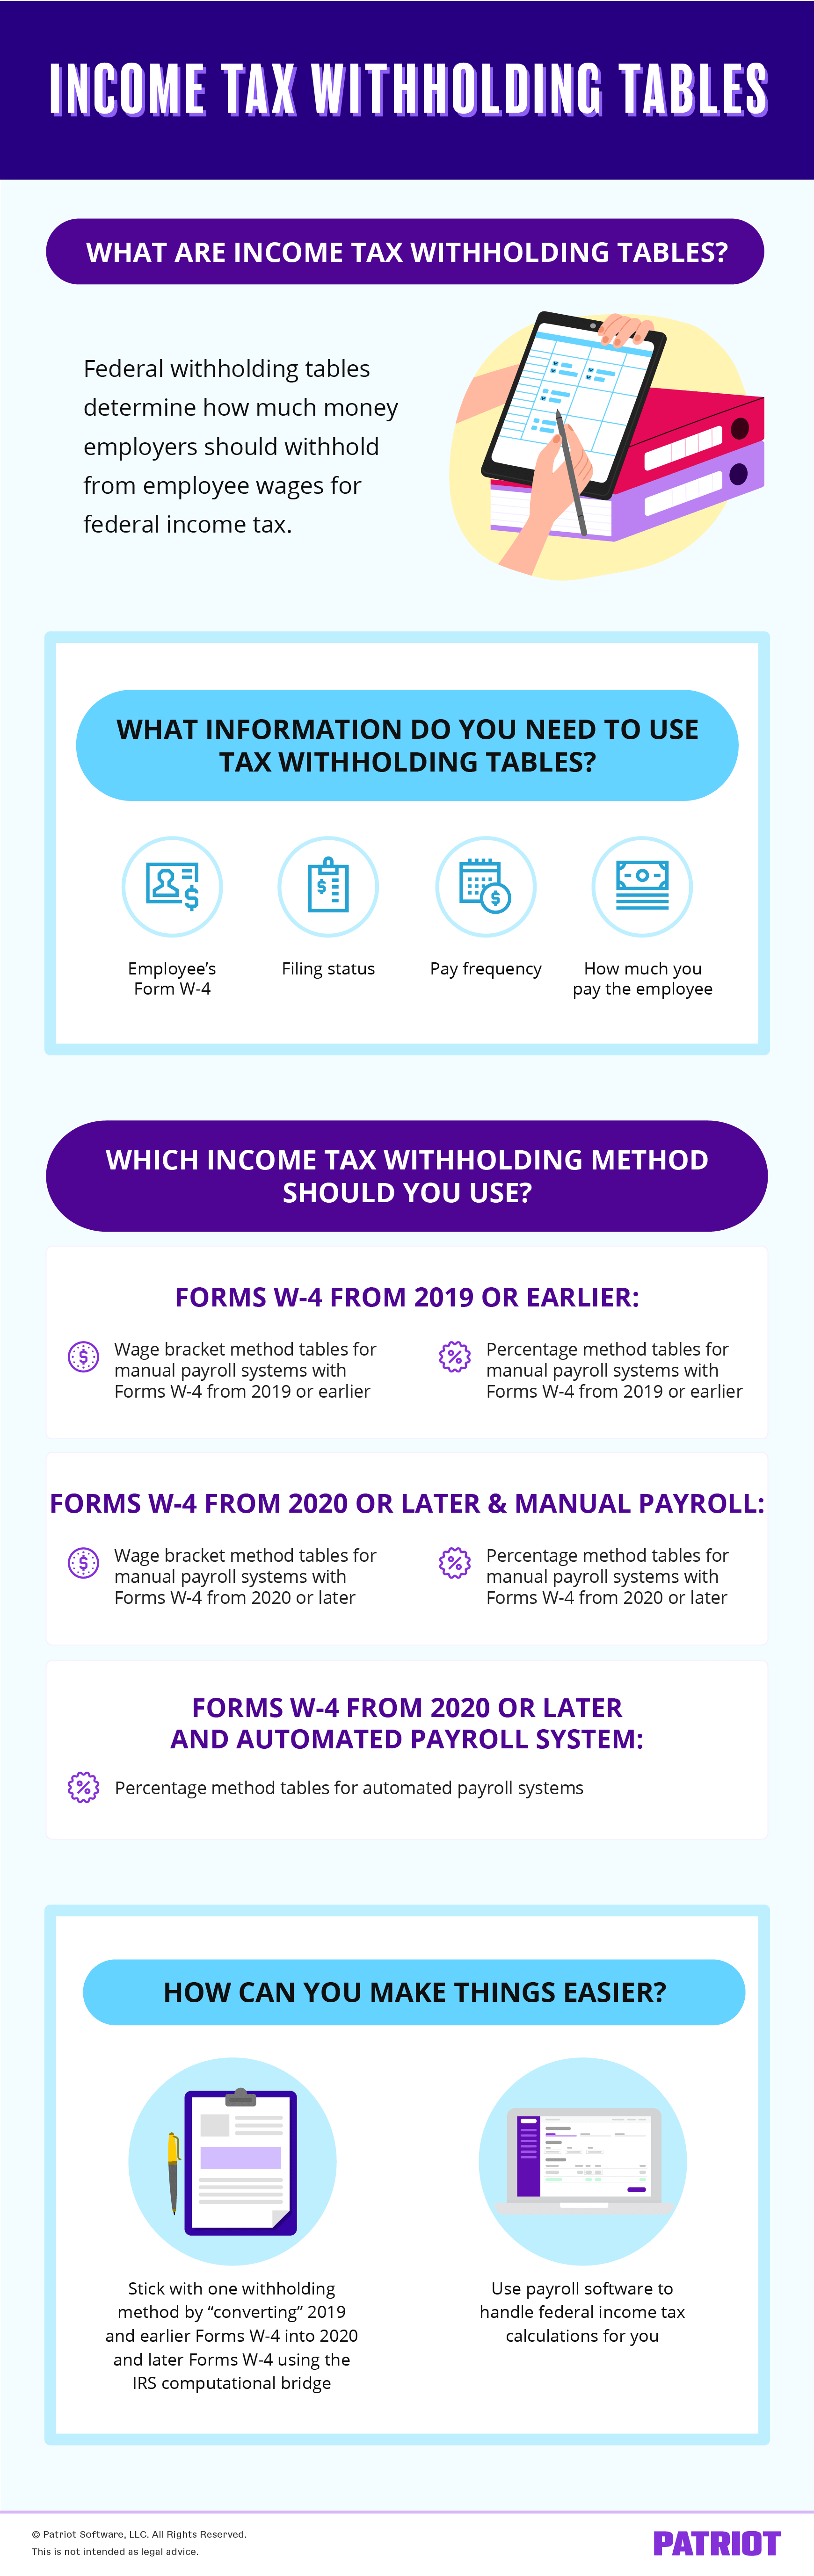 income tax withholding tables infographic detailing what they are, information you need to use them, and which income tax withholding method to use, plus how to make tax withholding easier 